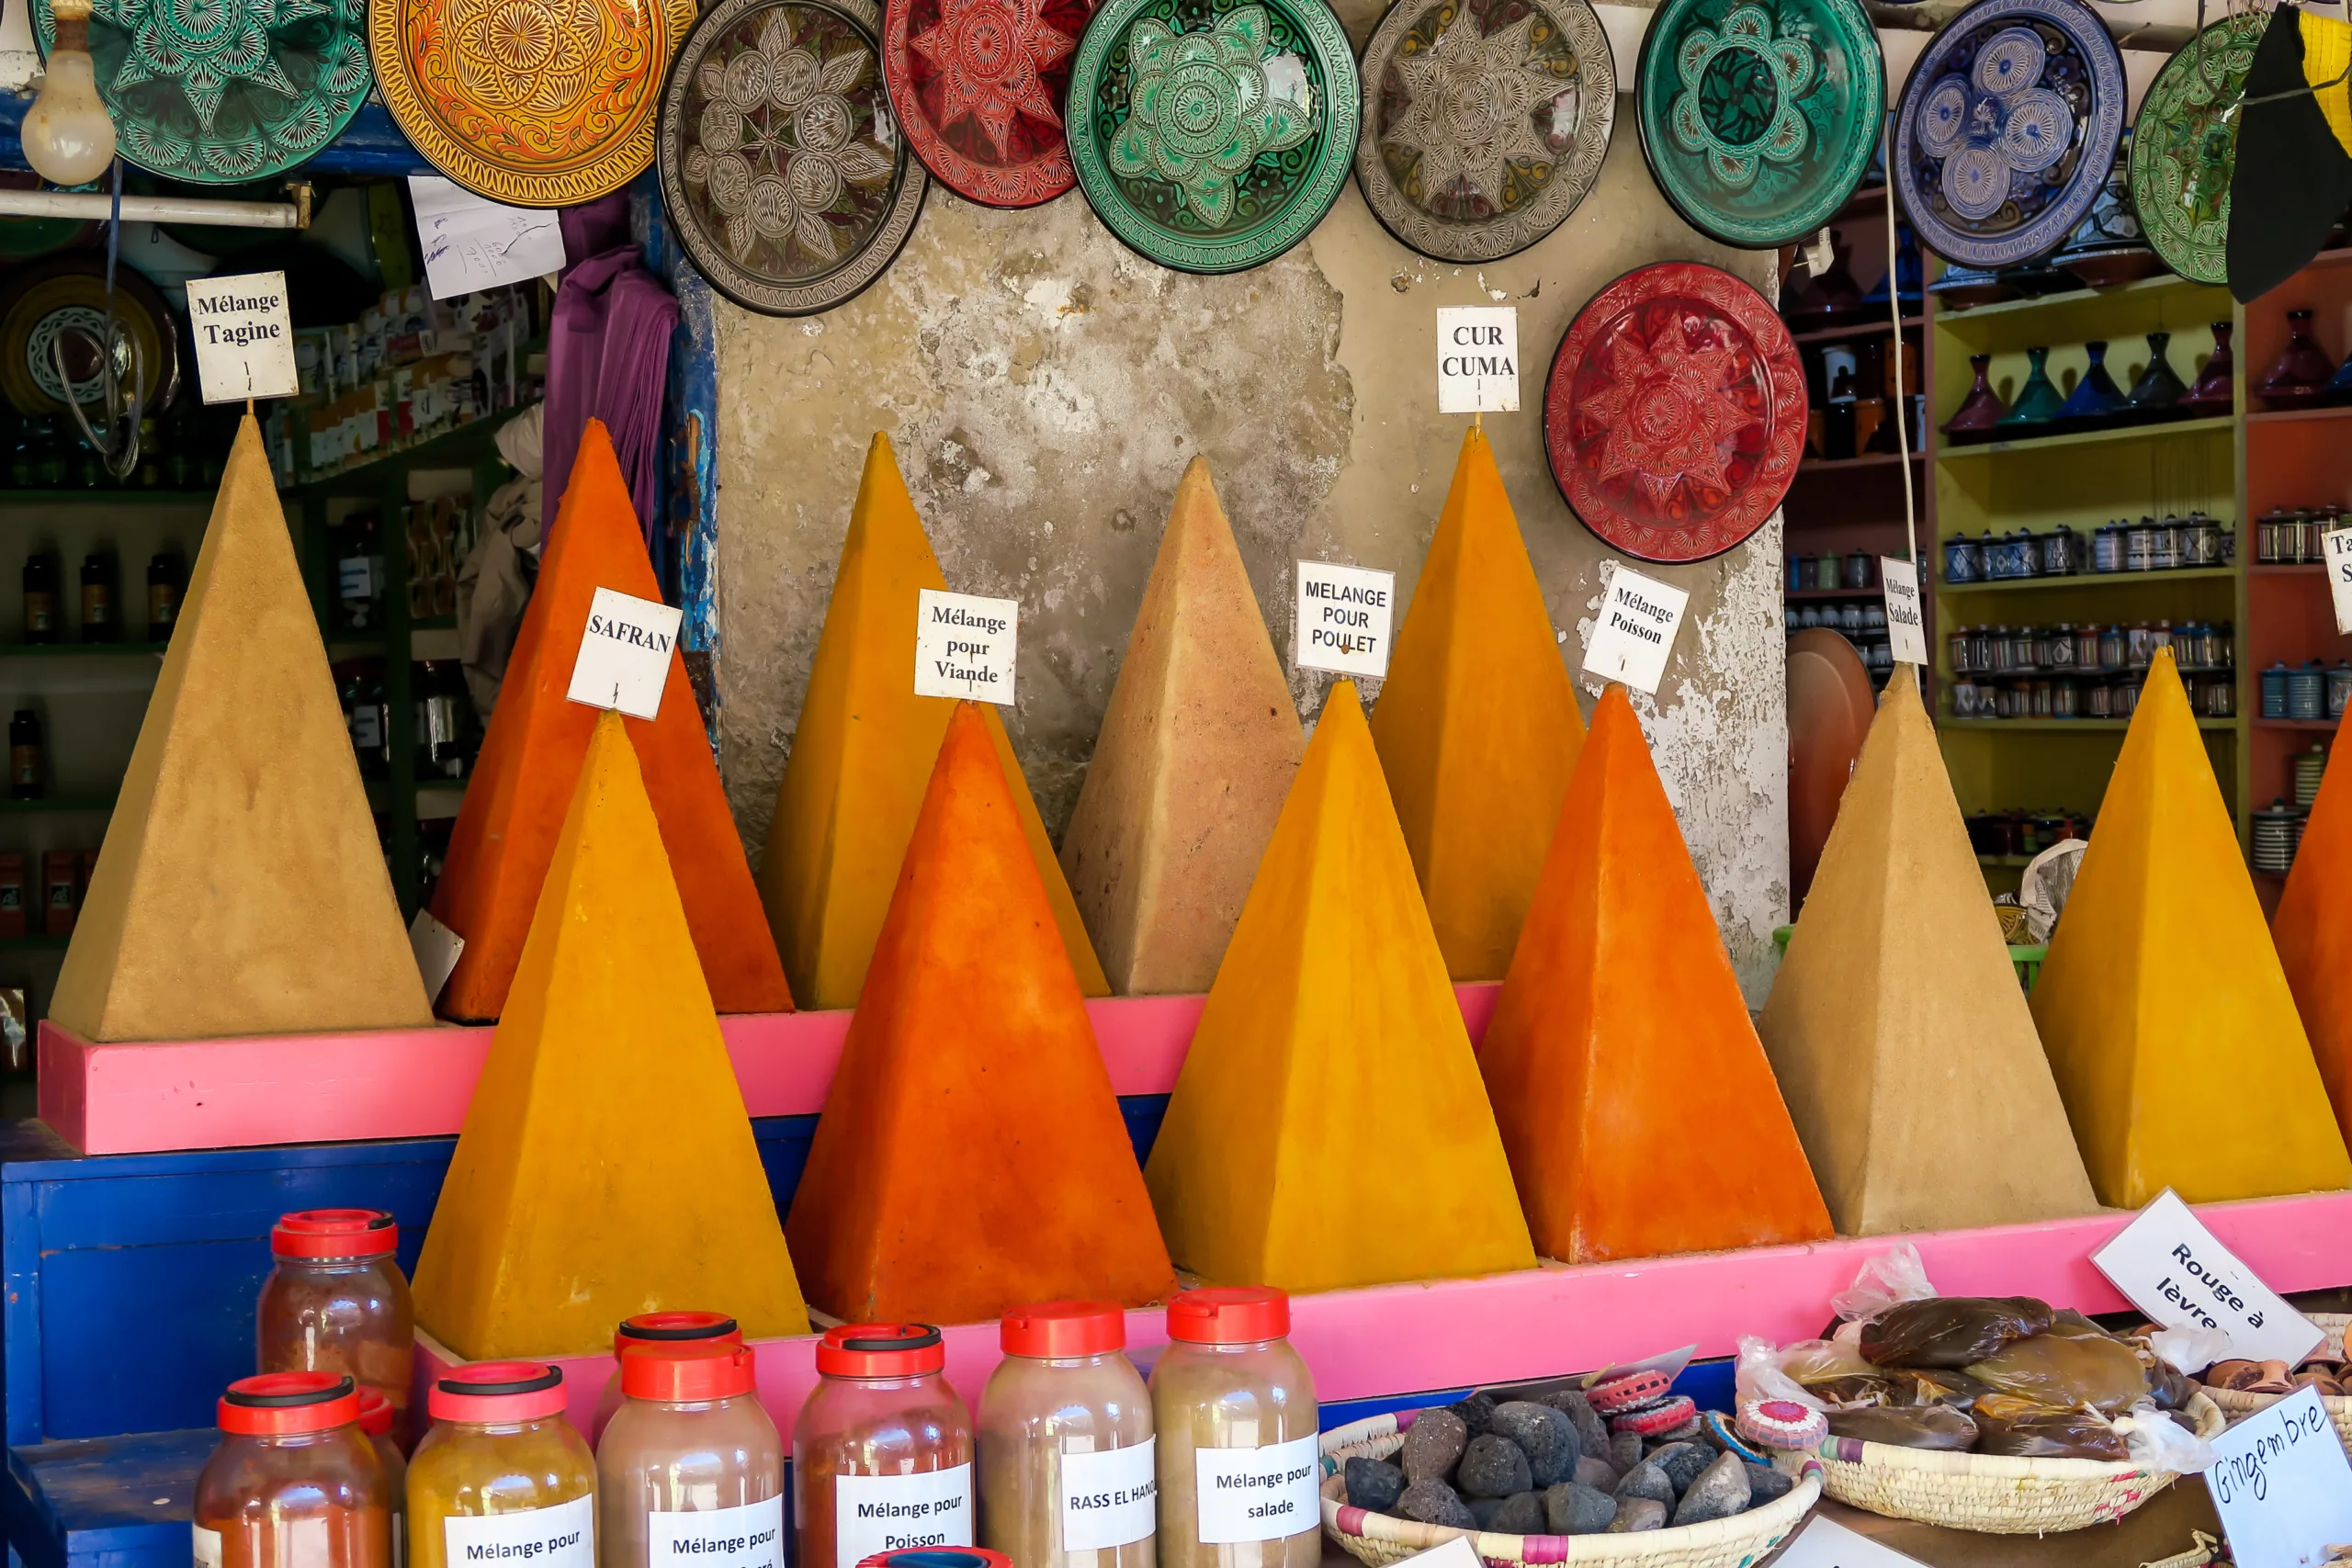 Rows of spice piles in Essaouira market